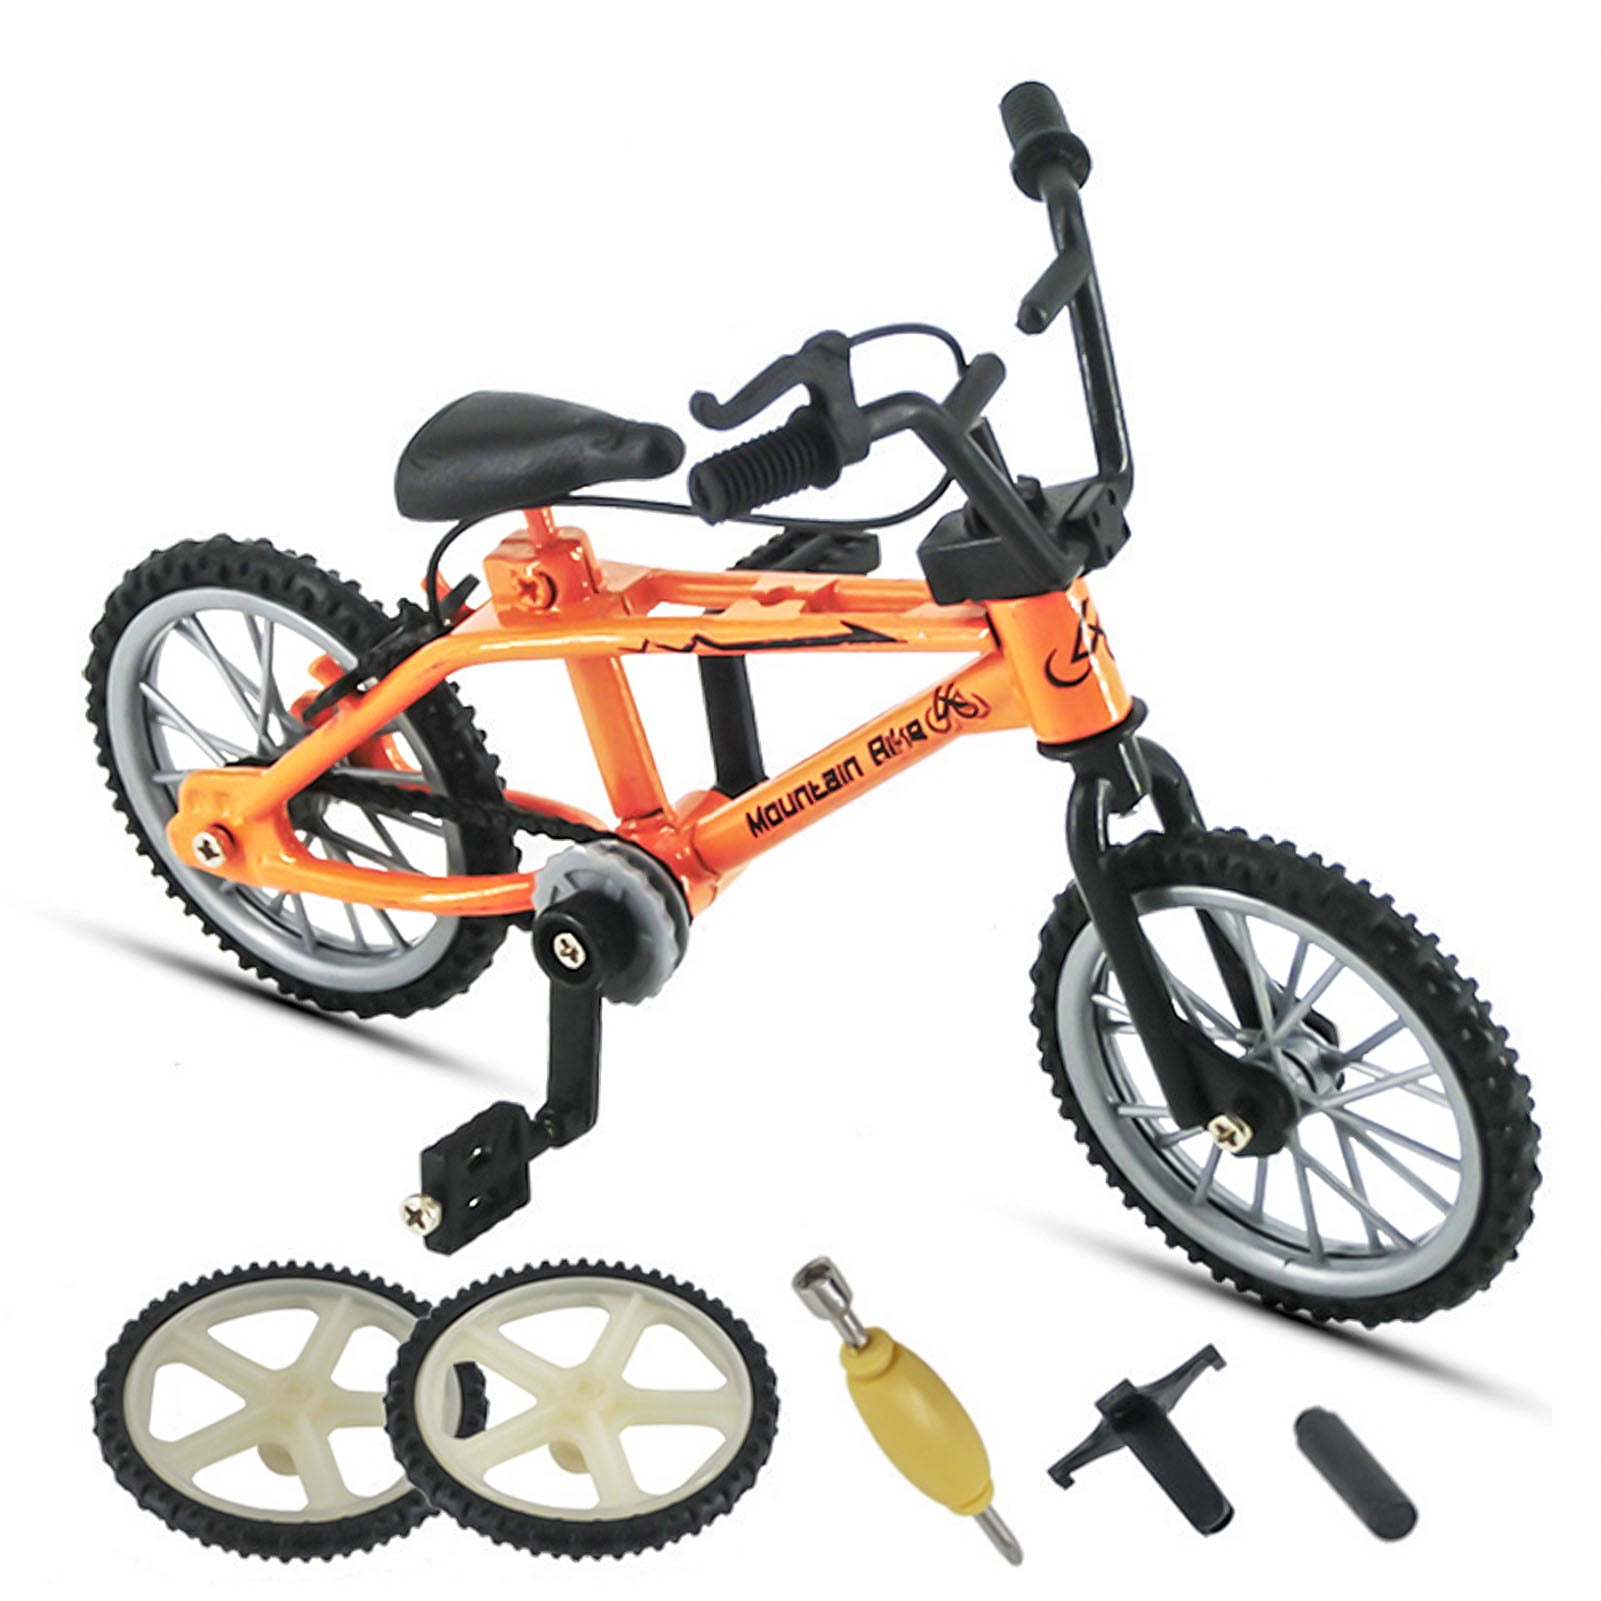 2X Minitaure Finger Mountain Bike Bicycle Collectible Gift for Boys Kids Toy 